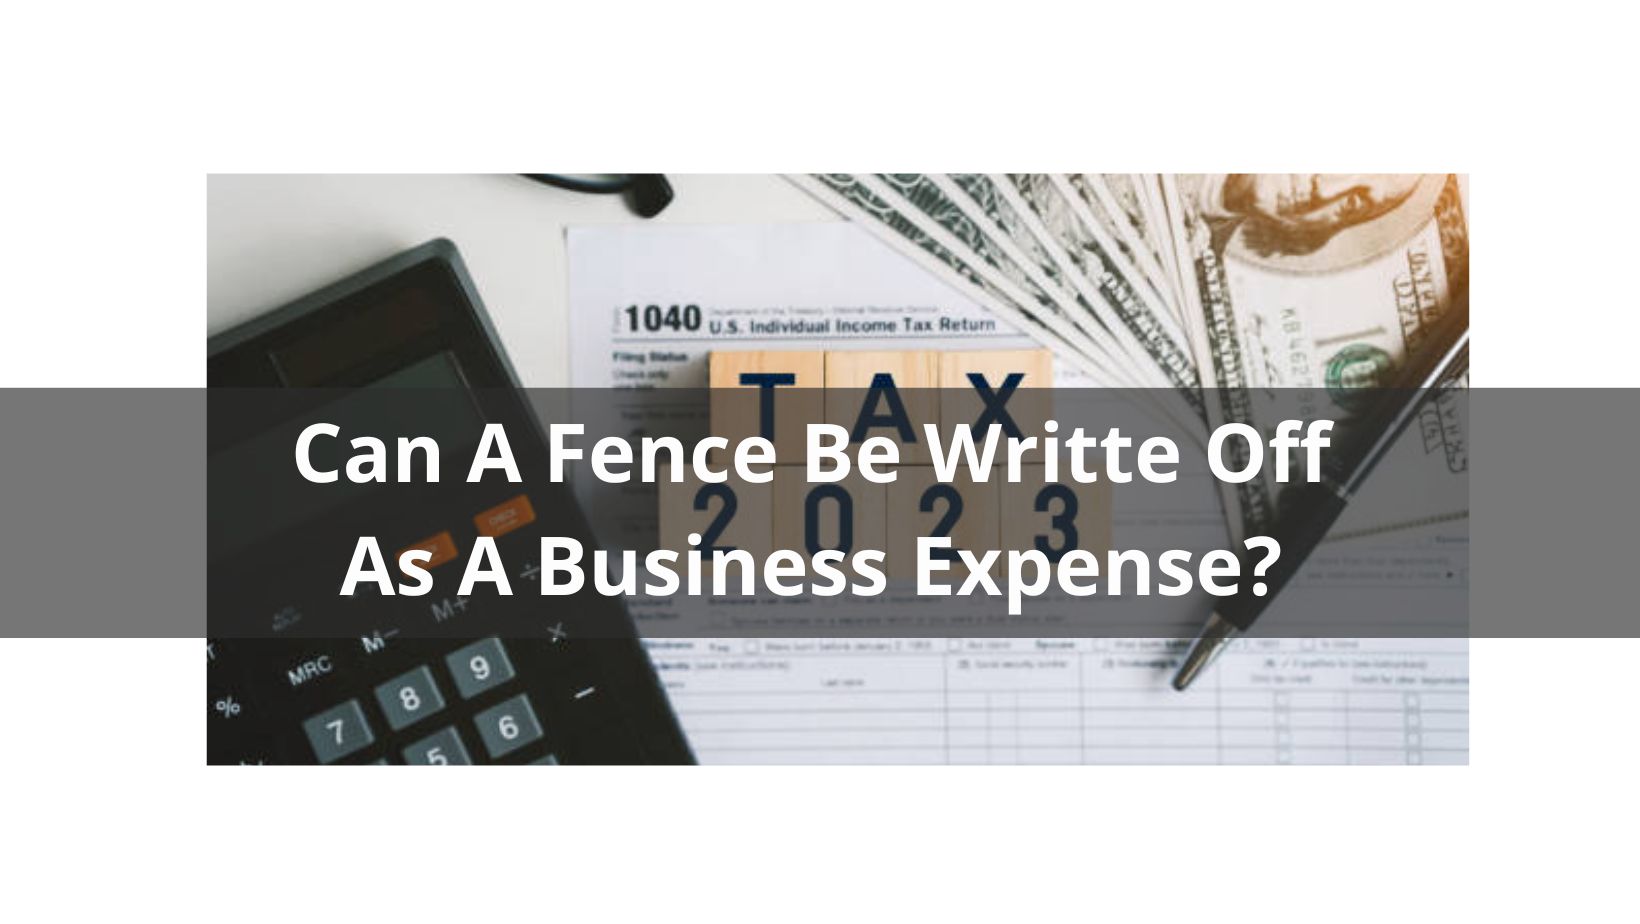 Deduct The Cost Of A Fence As A Legitimate Business Expense